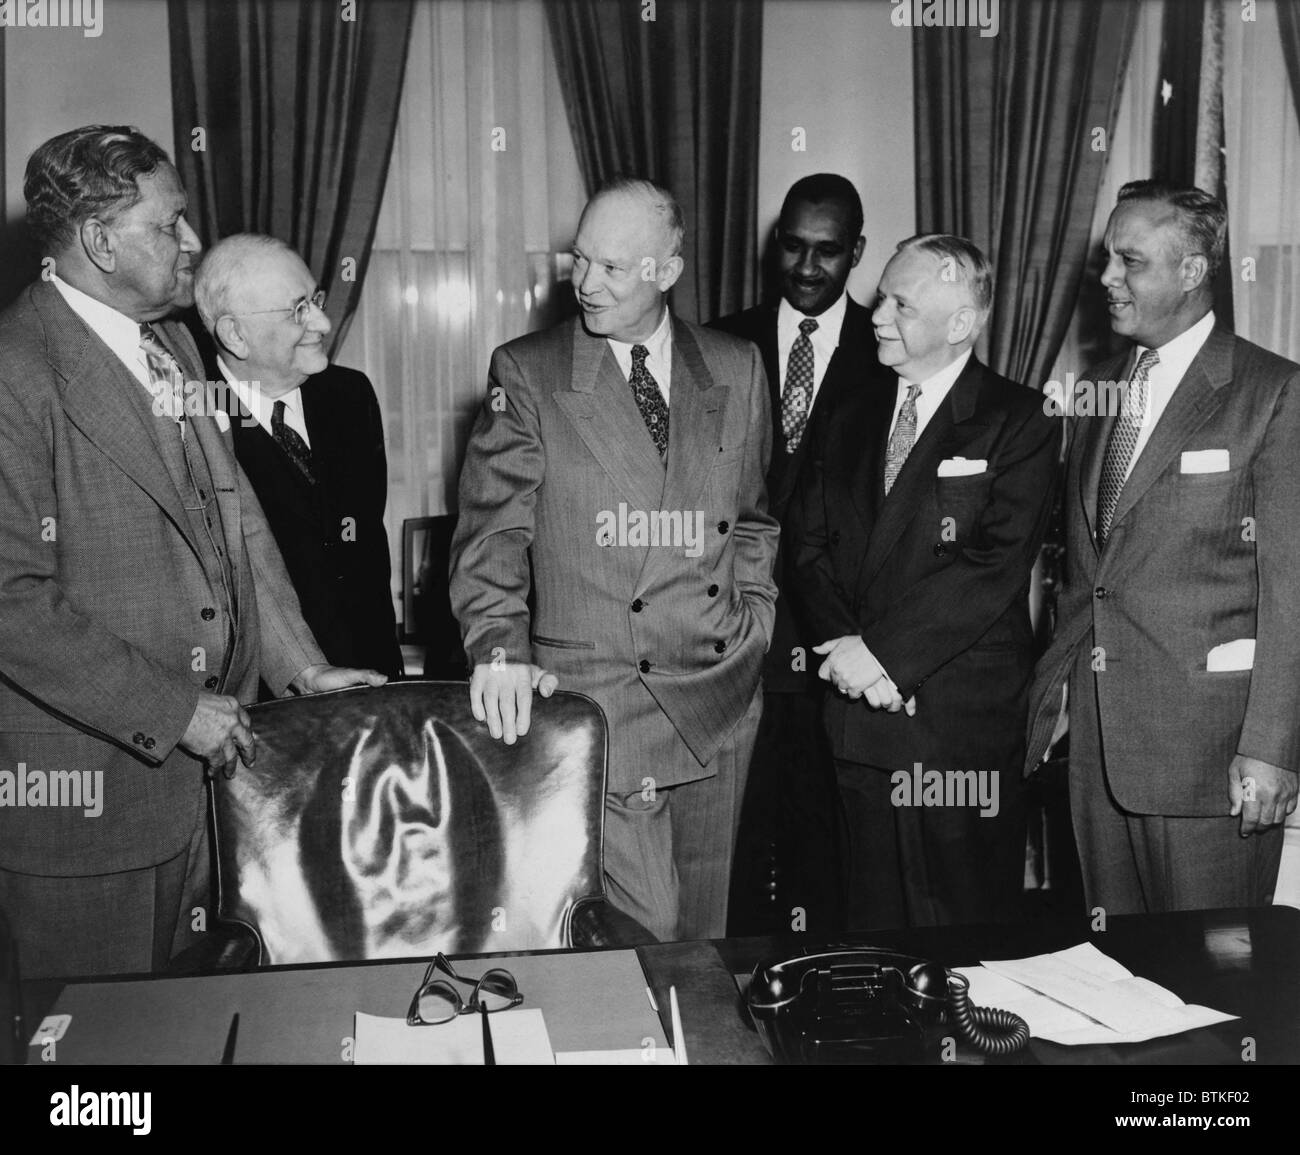 Dwight D. Eisenhower, meeting with NAACP leaders ca. 1954. Left to right: Channing Tobias, Arthur Spingarn, Pres. Dwight Eisenhower, Clarence Mitchell, Walter White, and Theodore Spaulding. Stock Photo